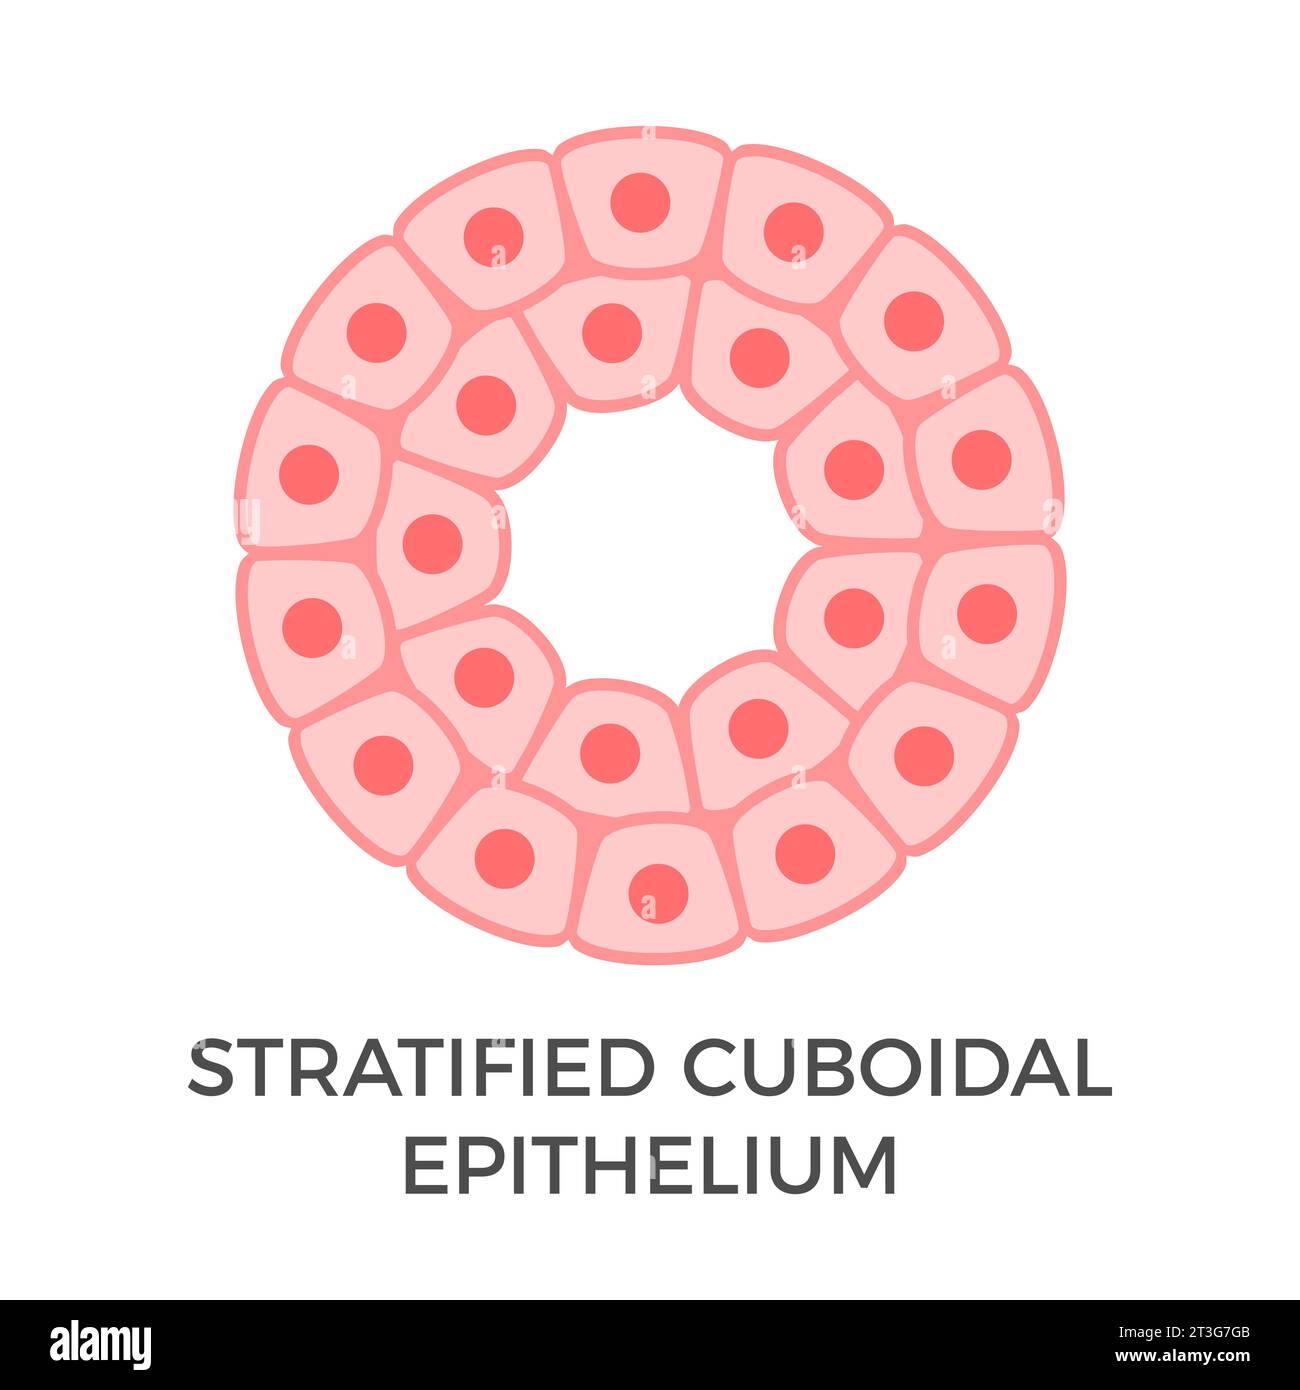 Stratified cuboidal epithelium. Epithelial tissue types. Multiple layers of cube-like cells. Occurs in the excretory ducts of sweat glands. Vector Stock Vector